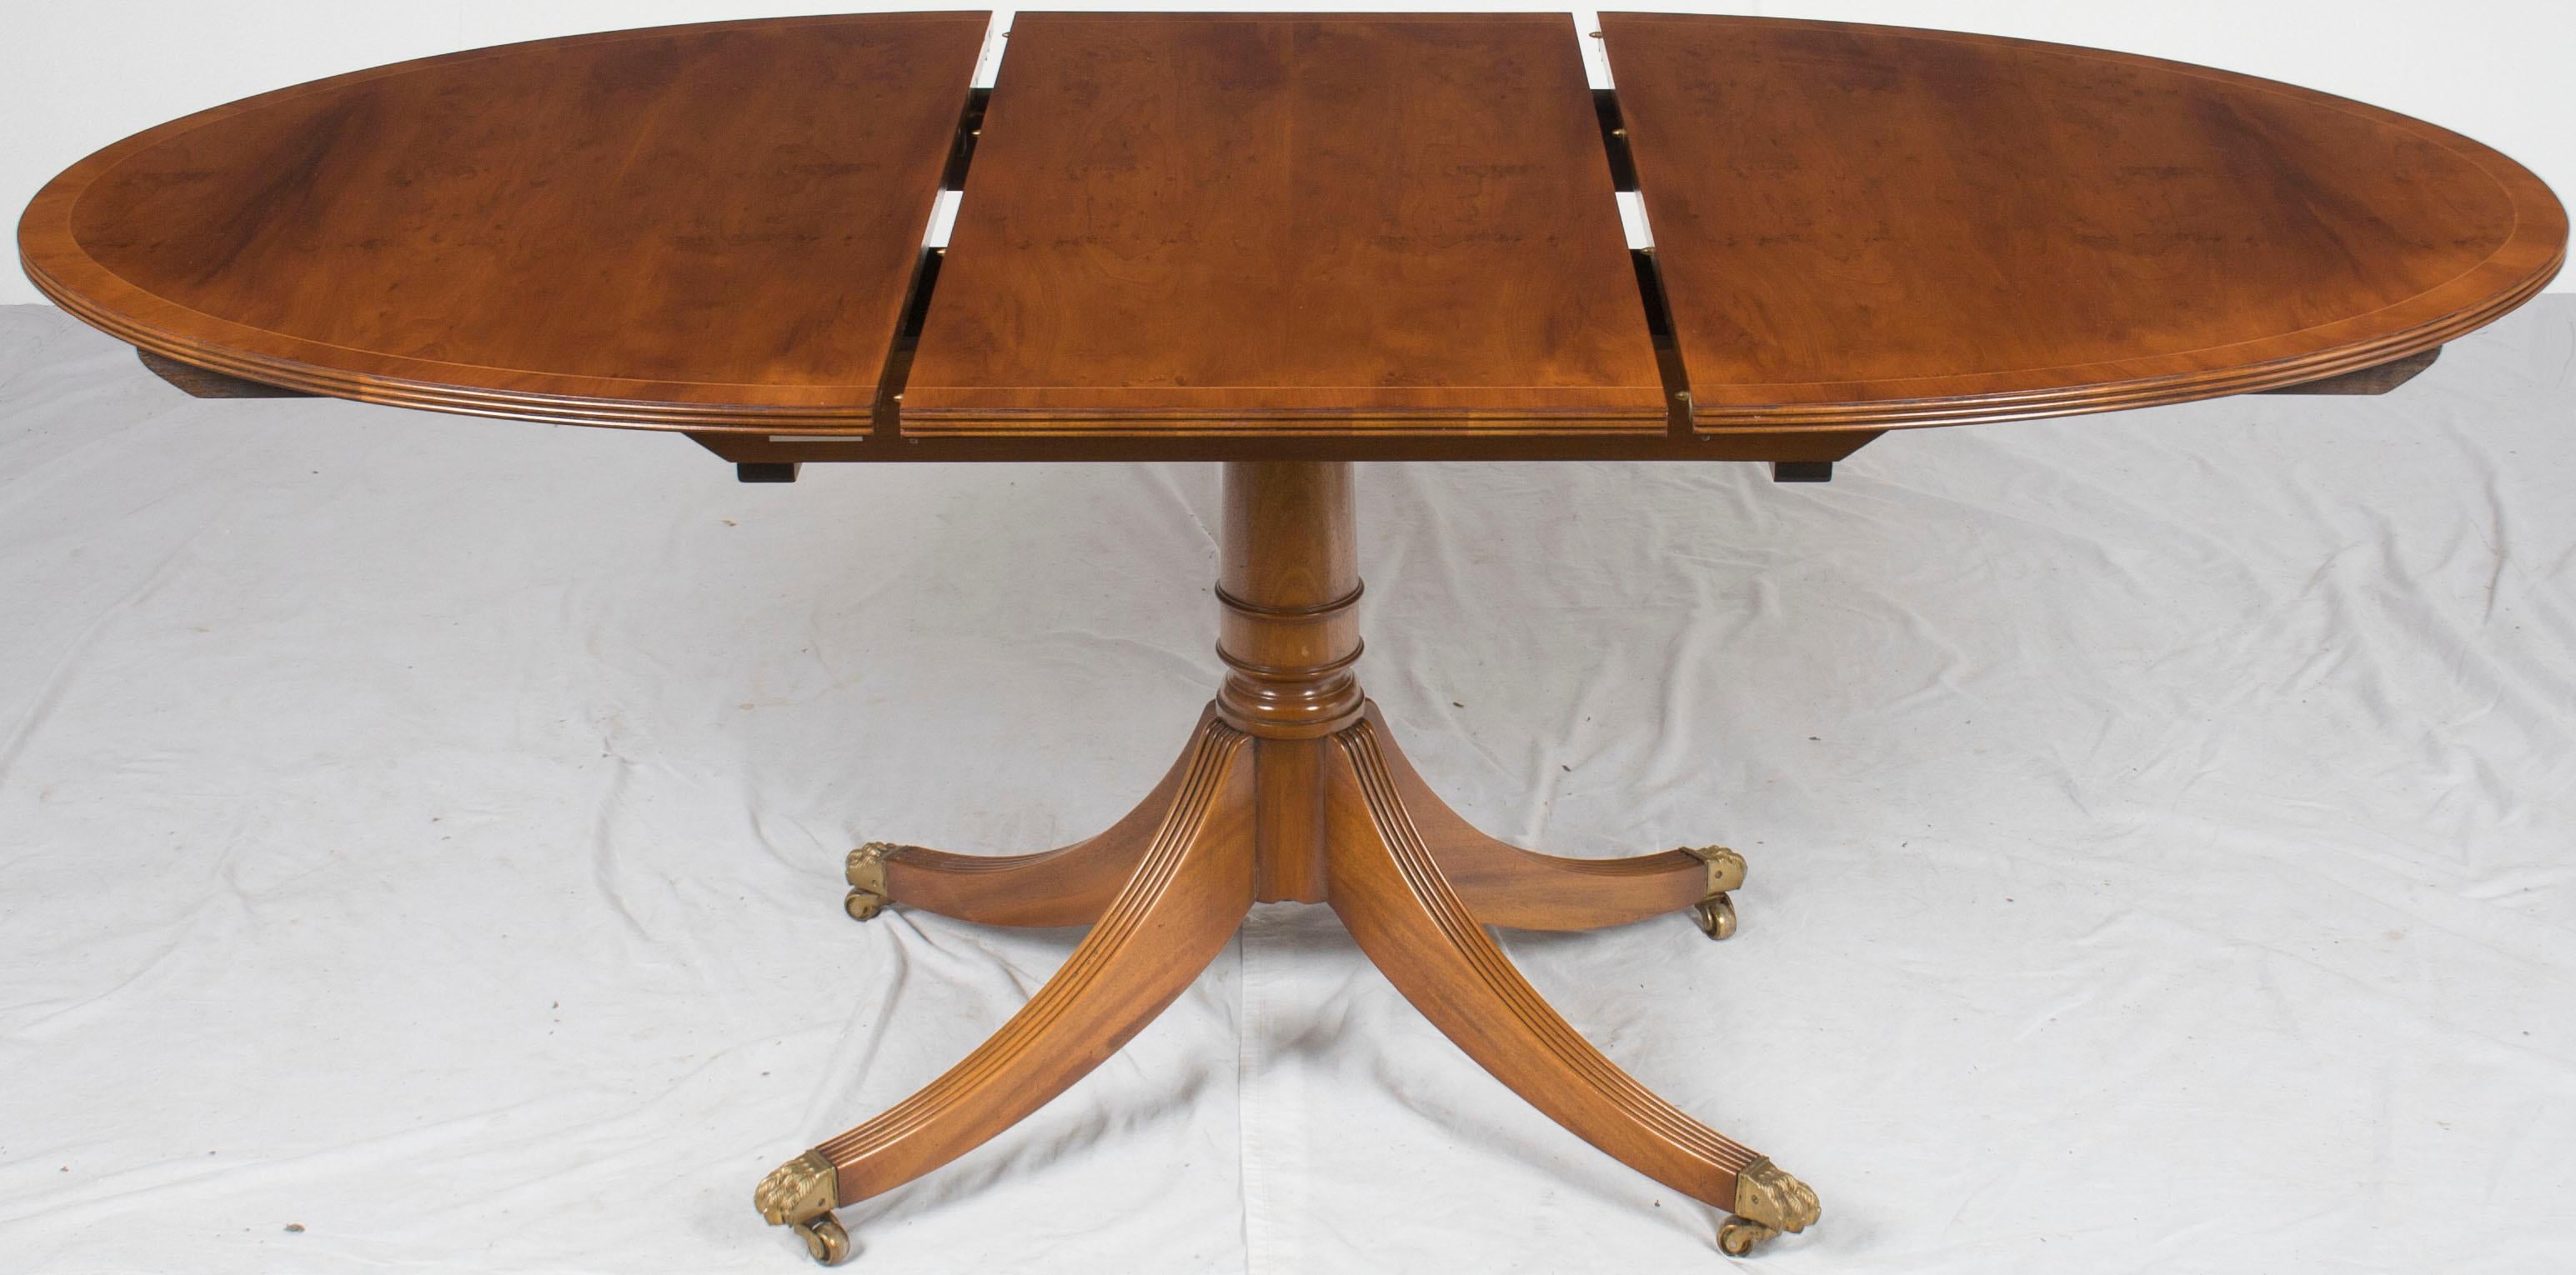 Oval Yew Wood Pedestal Dining Room Table with Leaf 1